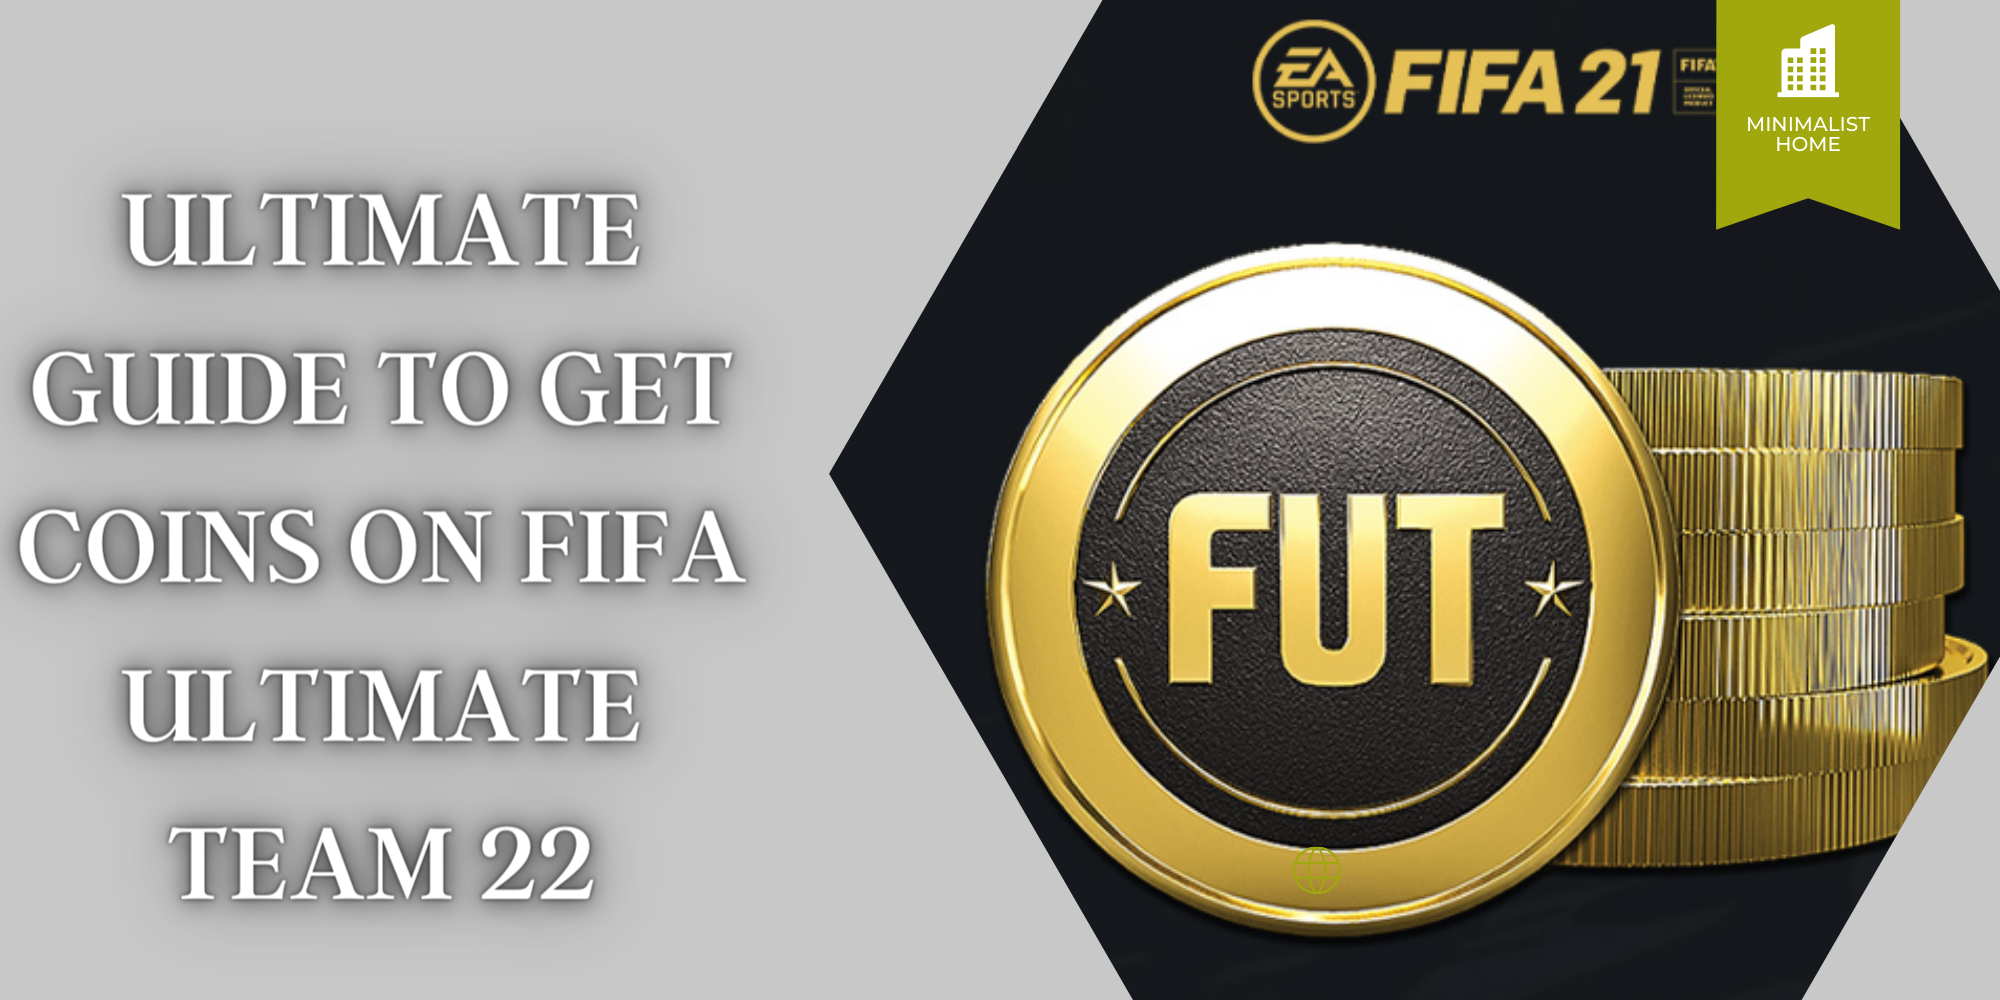 Ten Ultimate Guide to get Coins on FIFA Ultimate Team 22